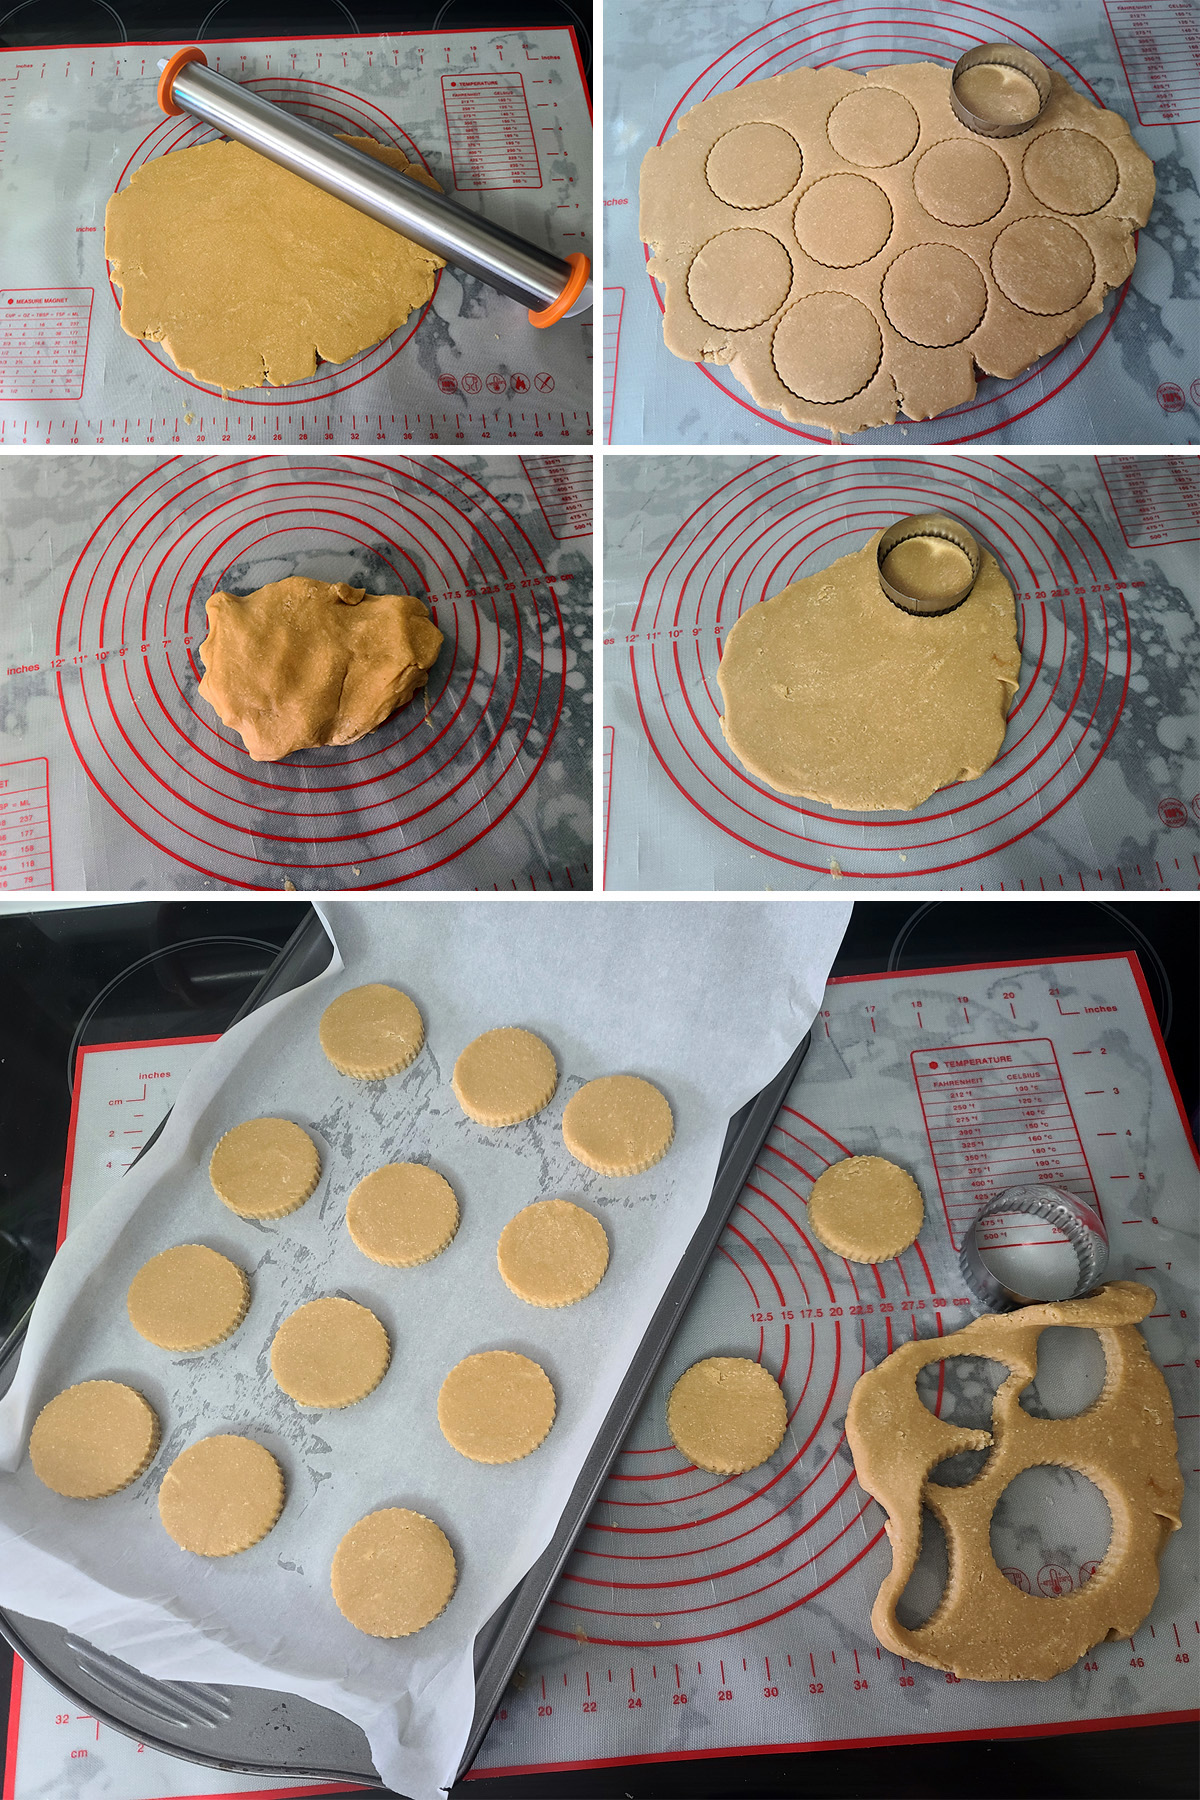 The gluten free shortbread cookie dough being rolled out, cut into rounds, and placed on a parchment lined baking sheet.